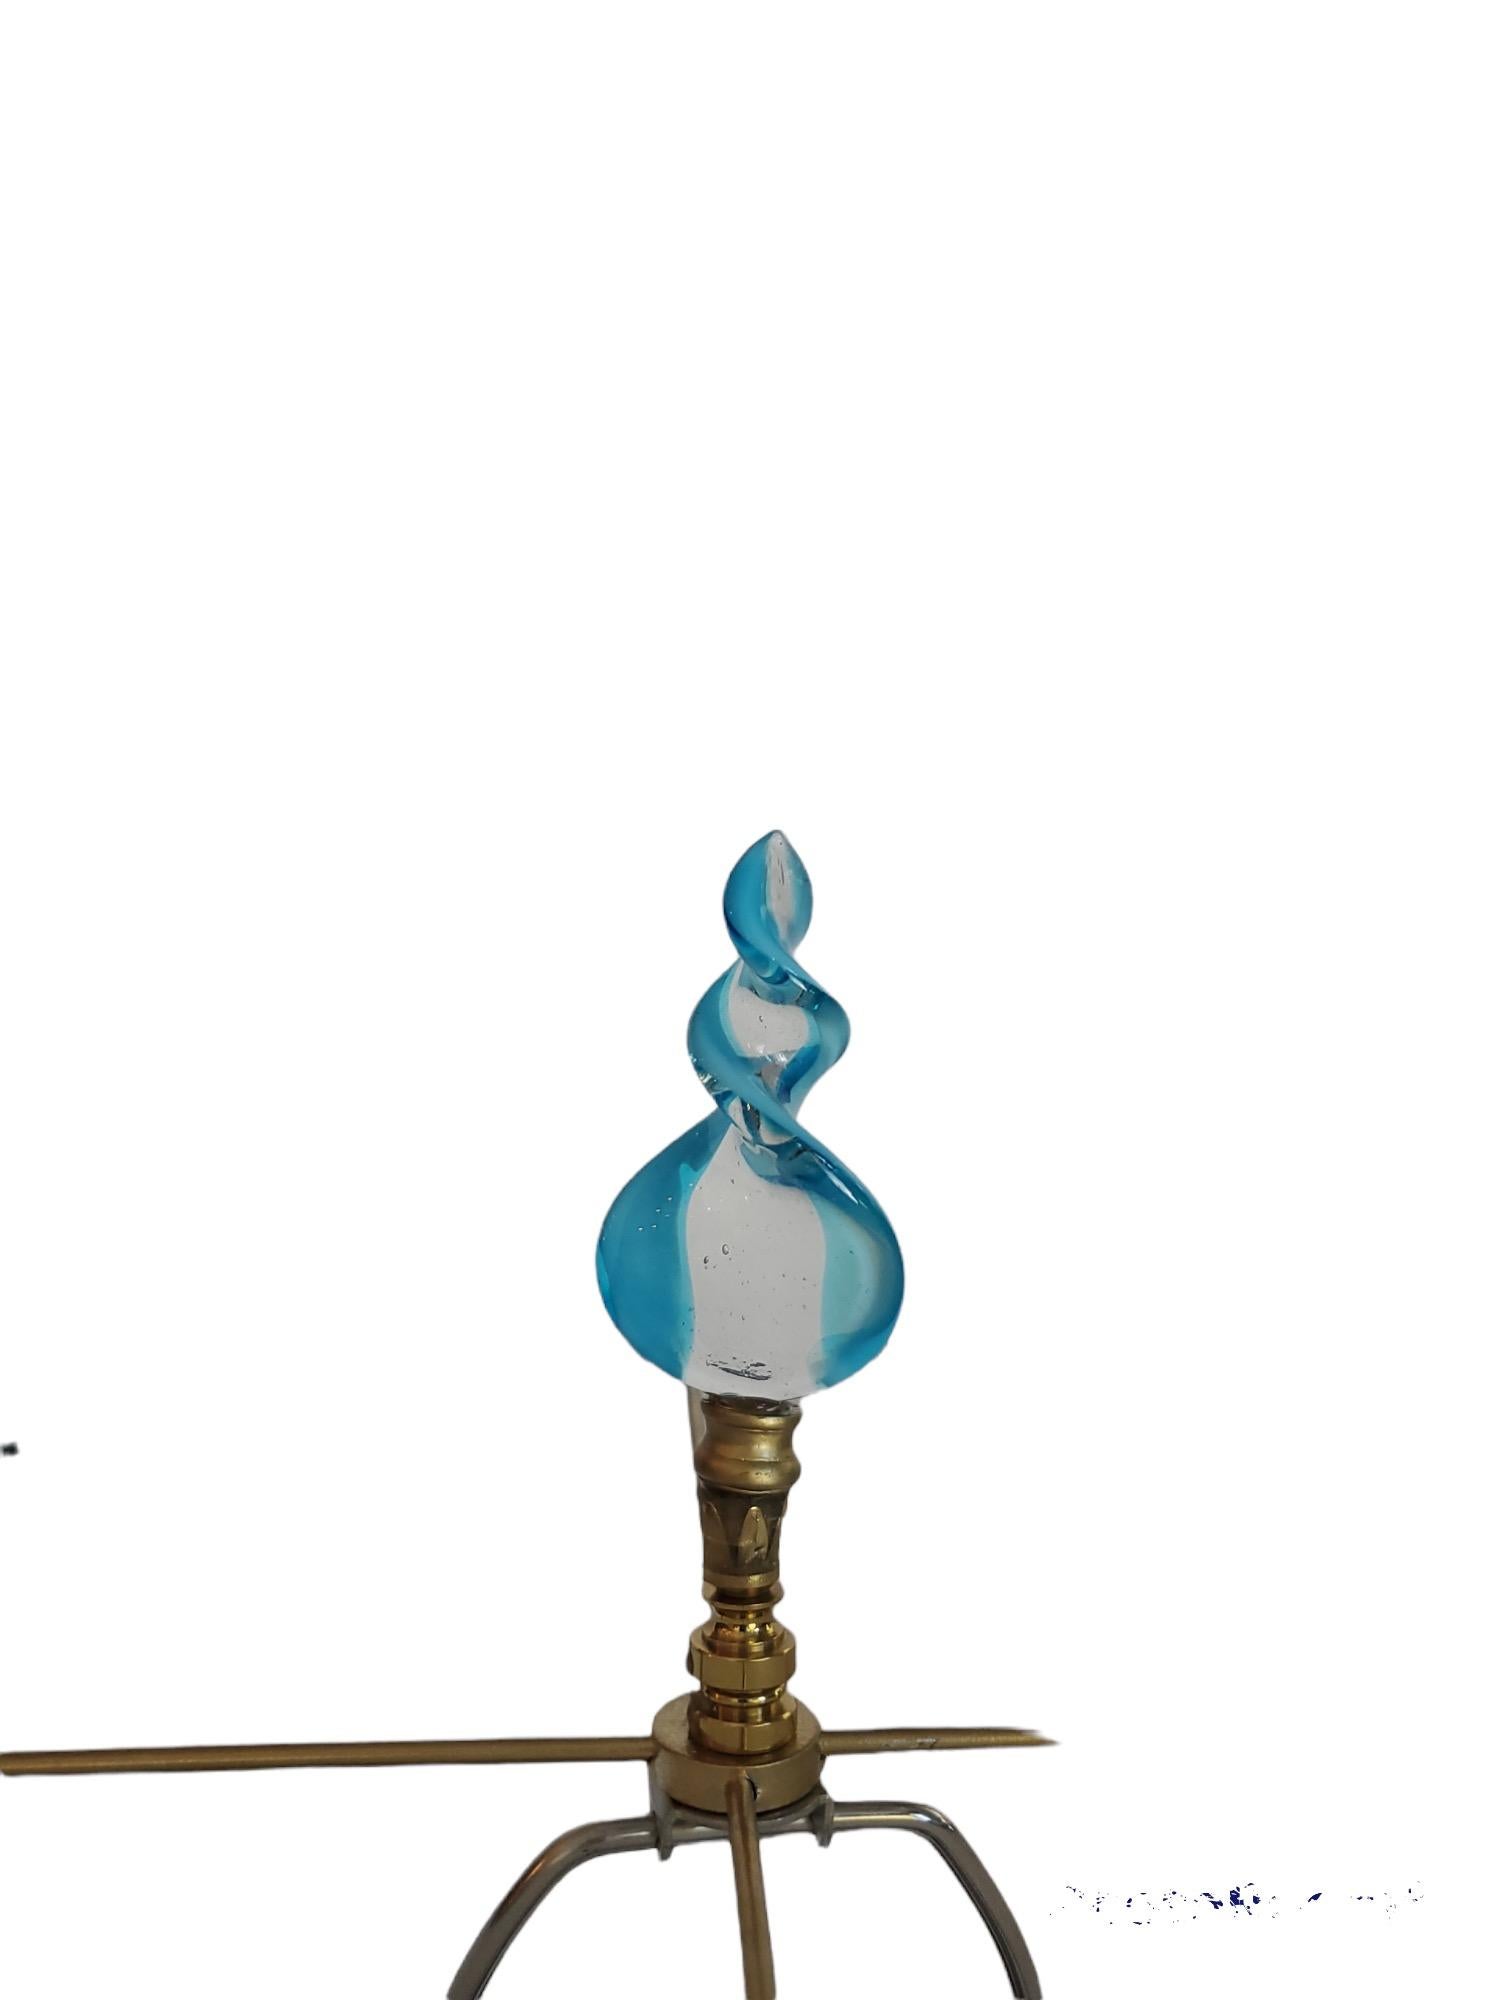 Single turquoise murano lamp with new acrylic base and wiring. Custom hand-painted parchment shade.